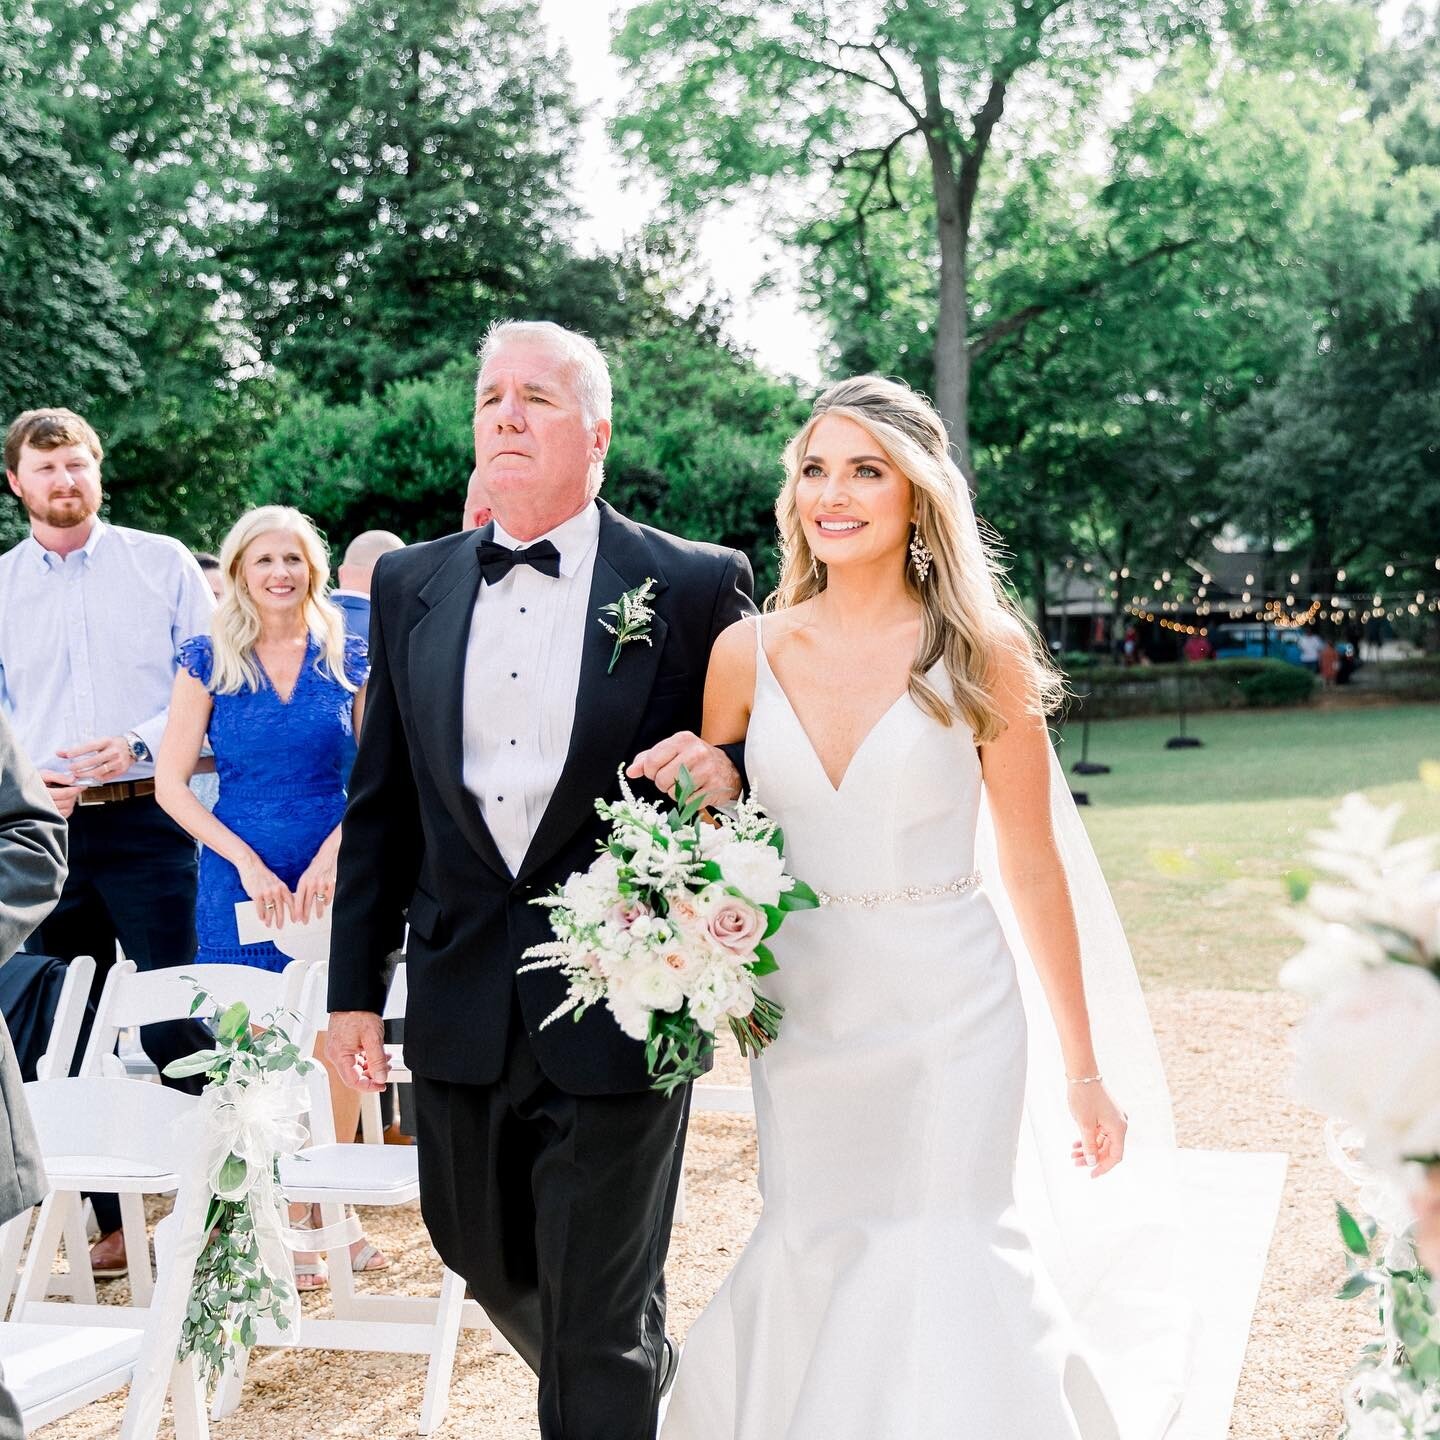 Walking down the aisle with her first love to the arms of her forever love.

Photo: @abbybyrdphotography
Beauty: @jolieartistryco - Christina &amp; Chelsie
Florals: @flowersbyus
Venue: @naylorhall